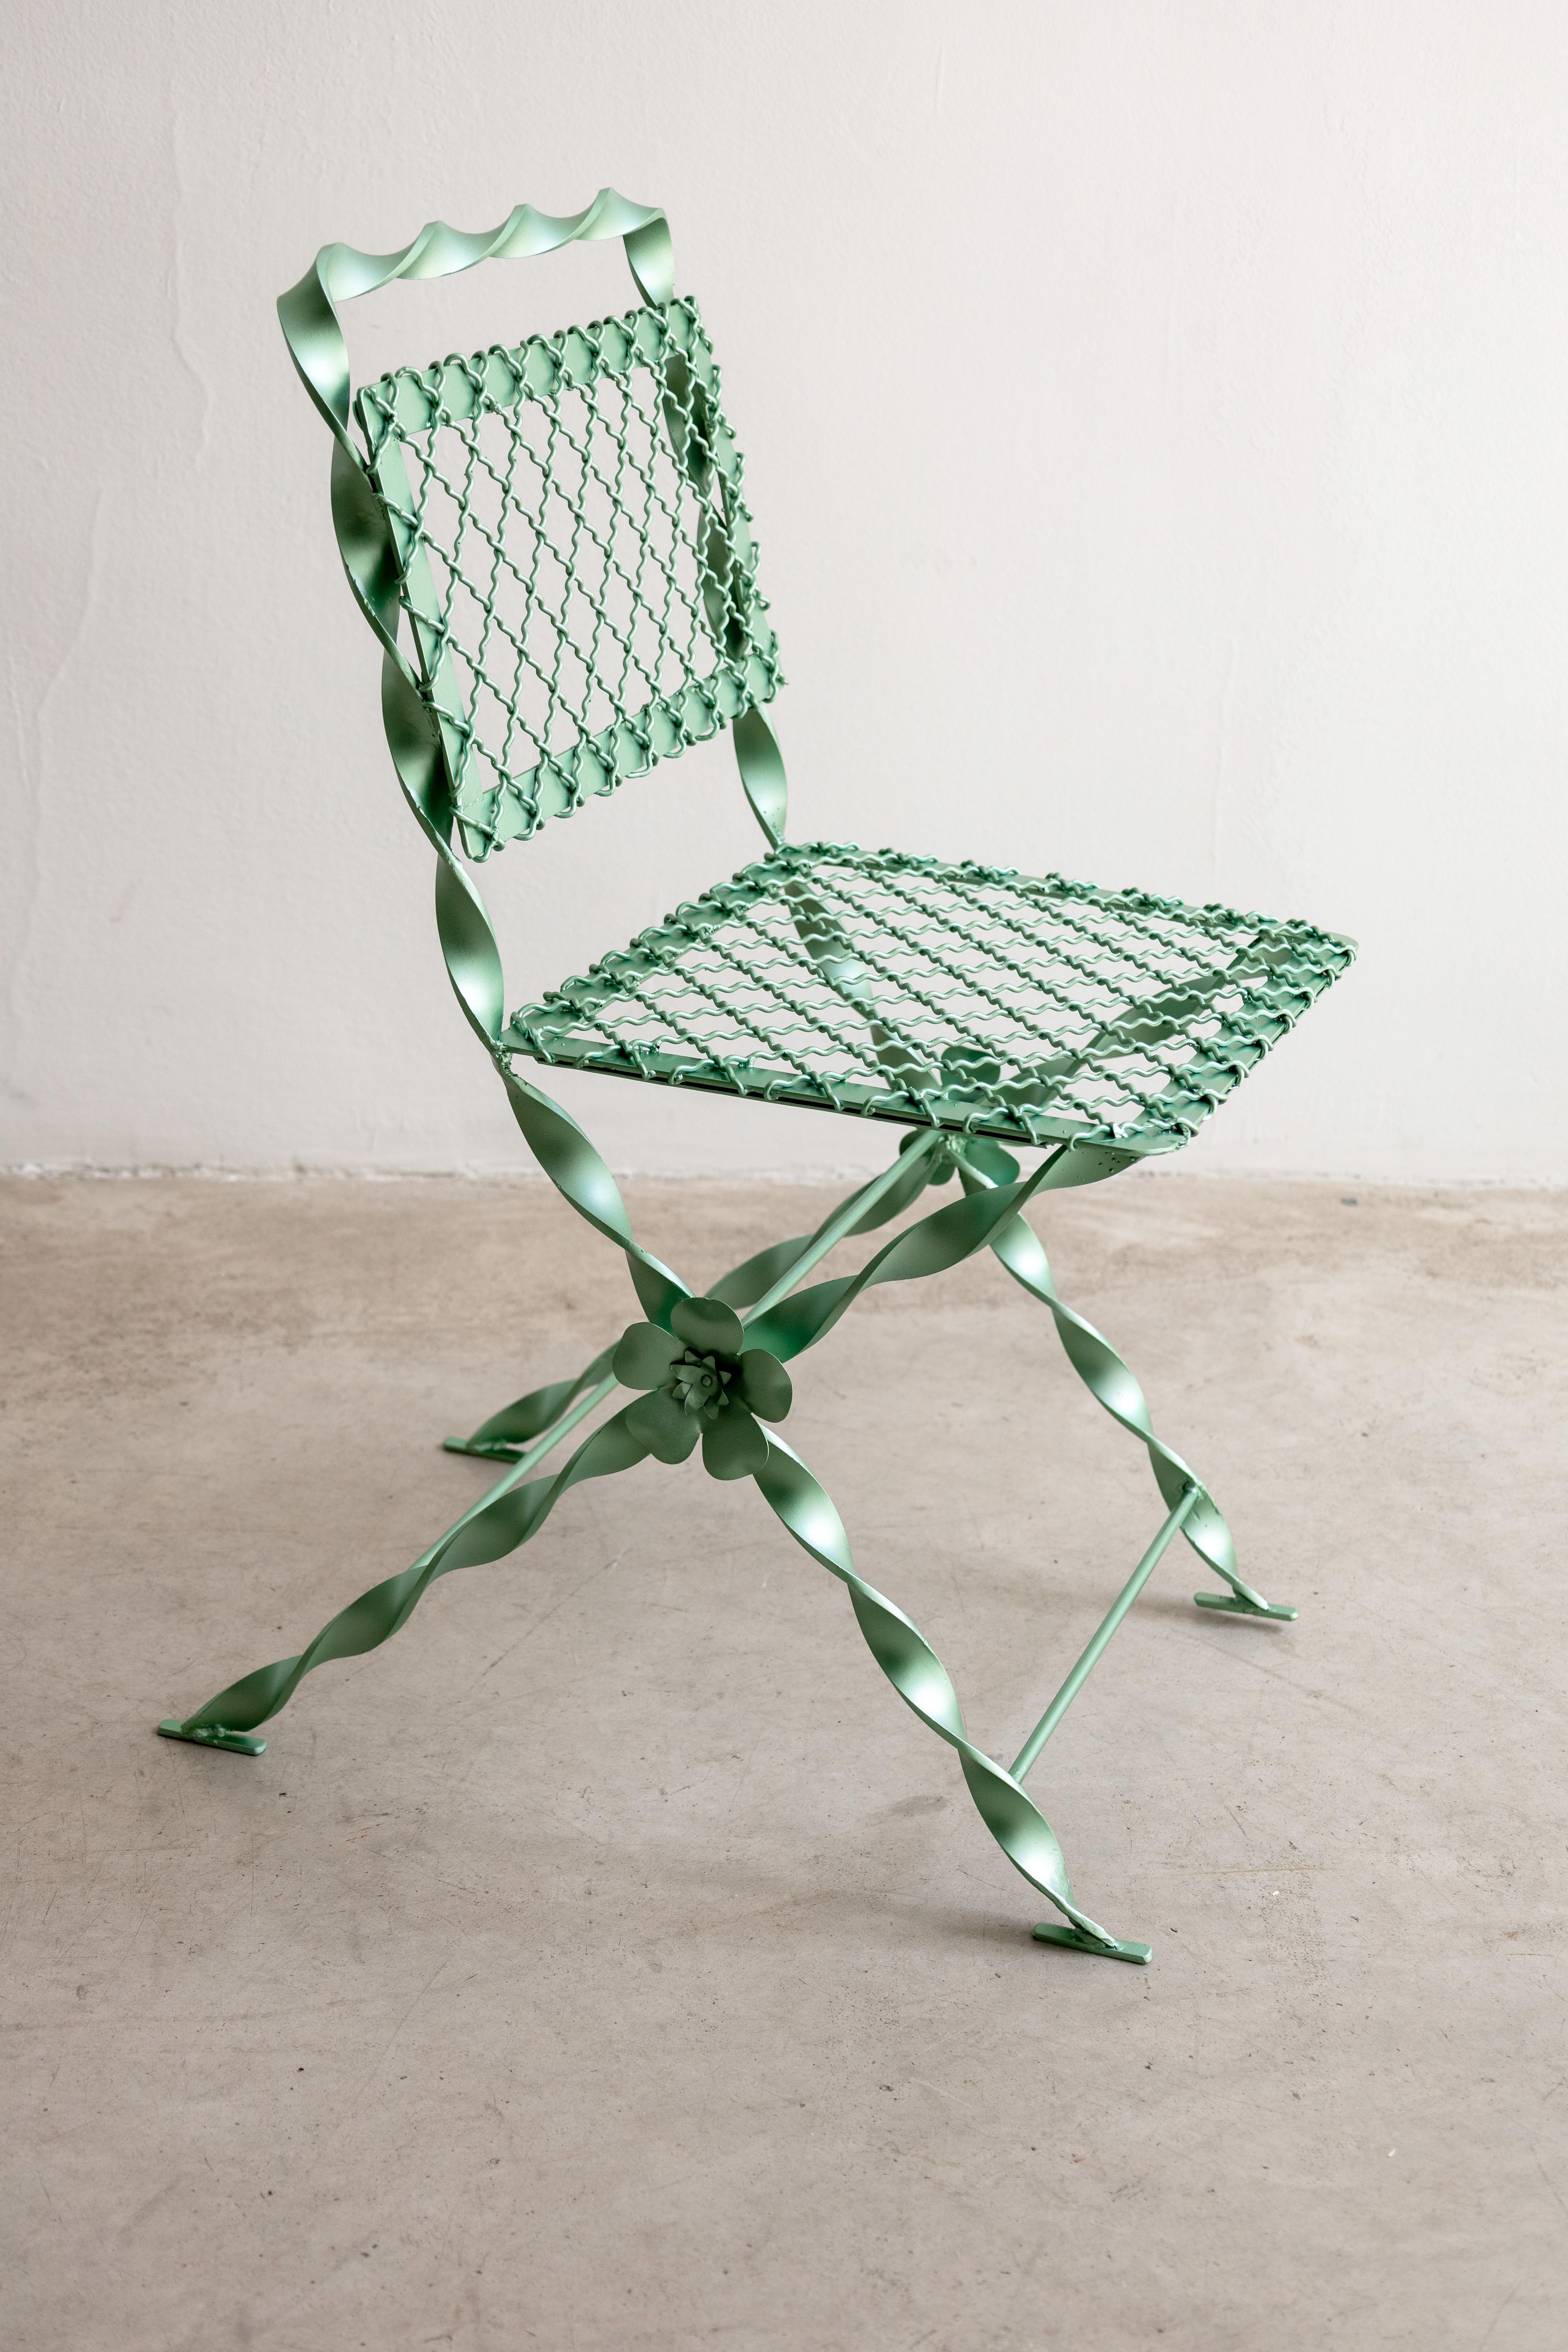 Forged Wrought Iron Garden Chair Metallic Tyffany's Green finish Contemporary Design For Sale